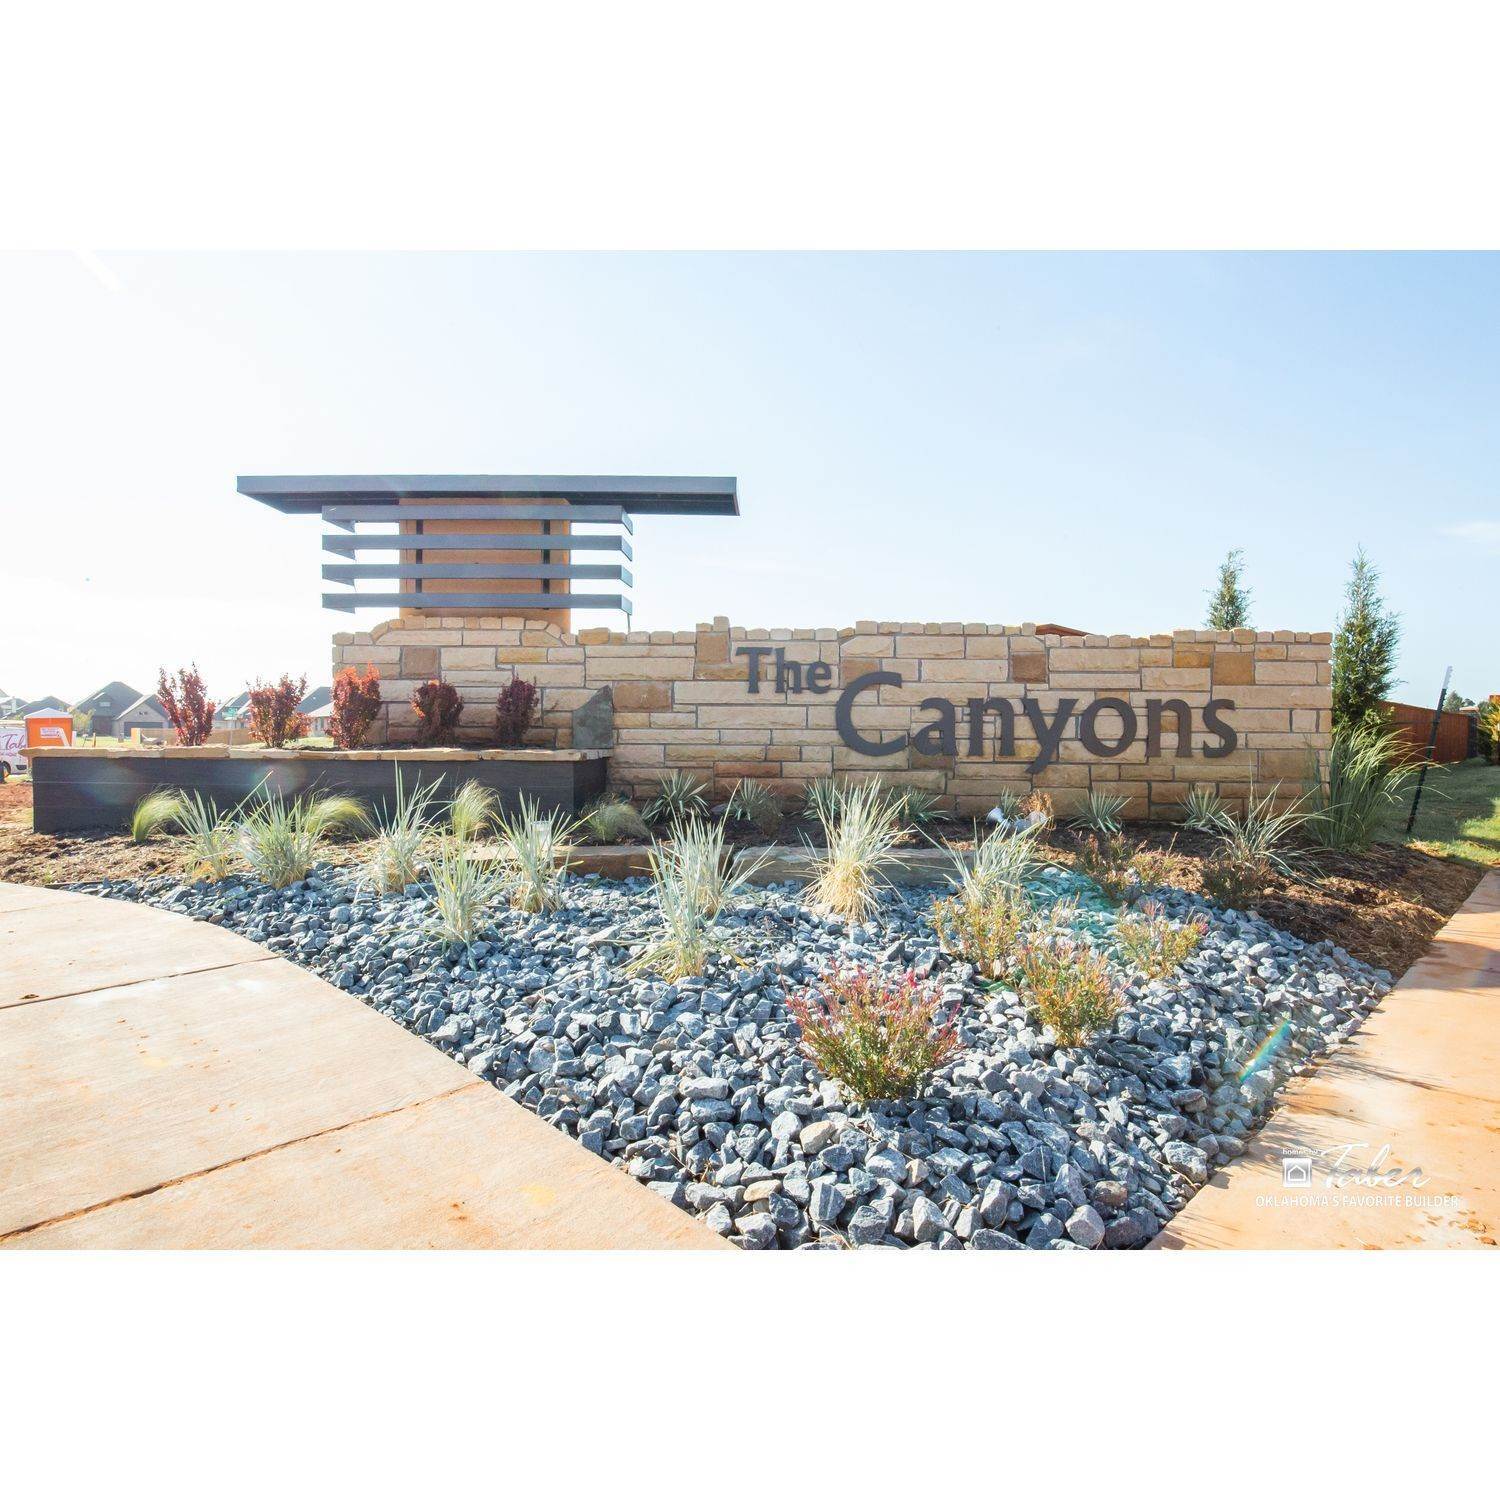 50. Canyons bâtiment à 10533 SW 52nd St, Mustang, OK 73064